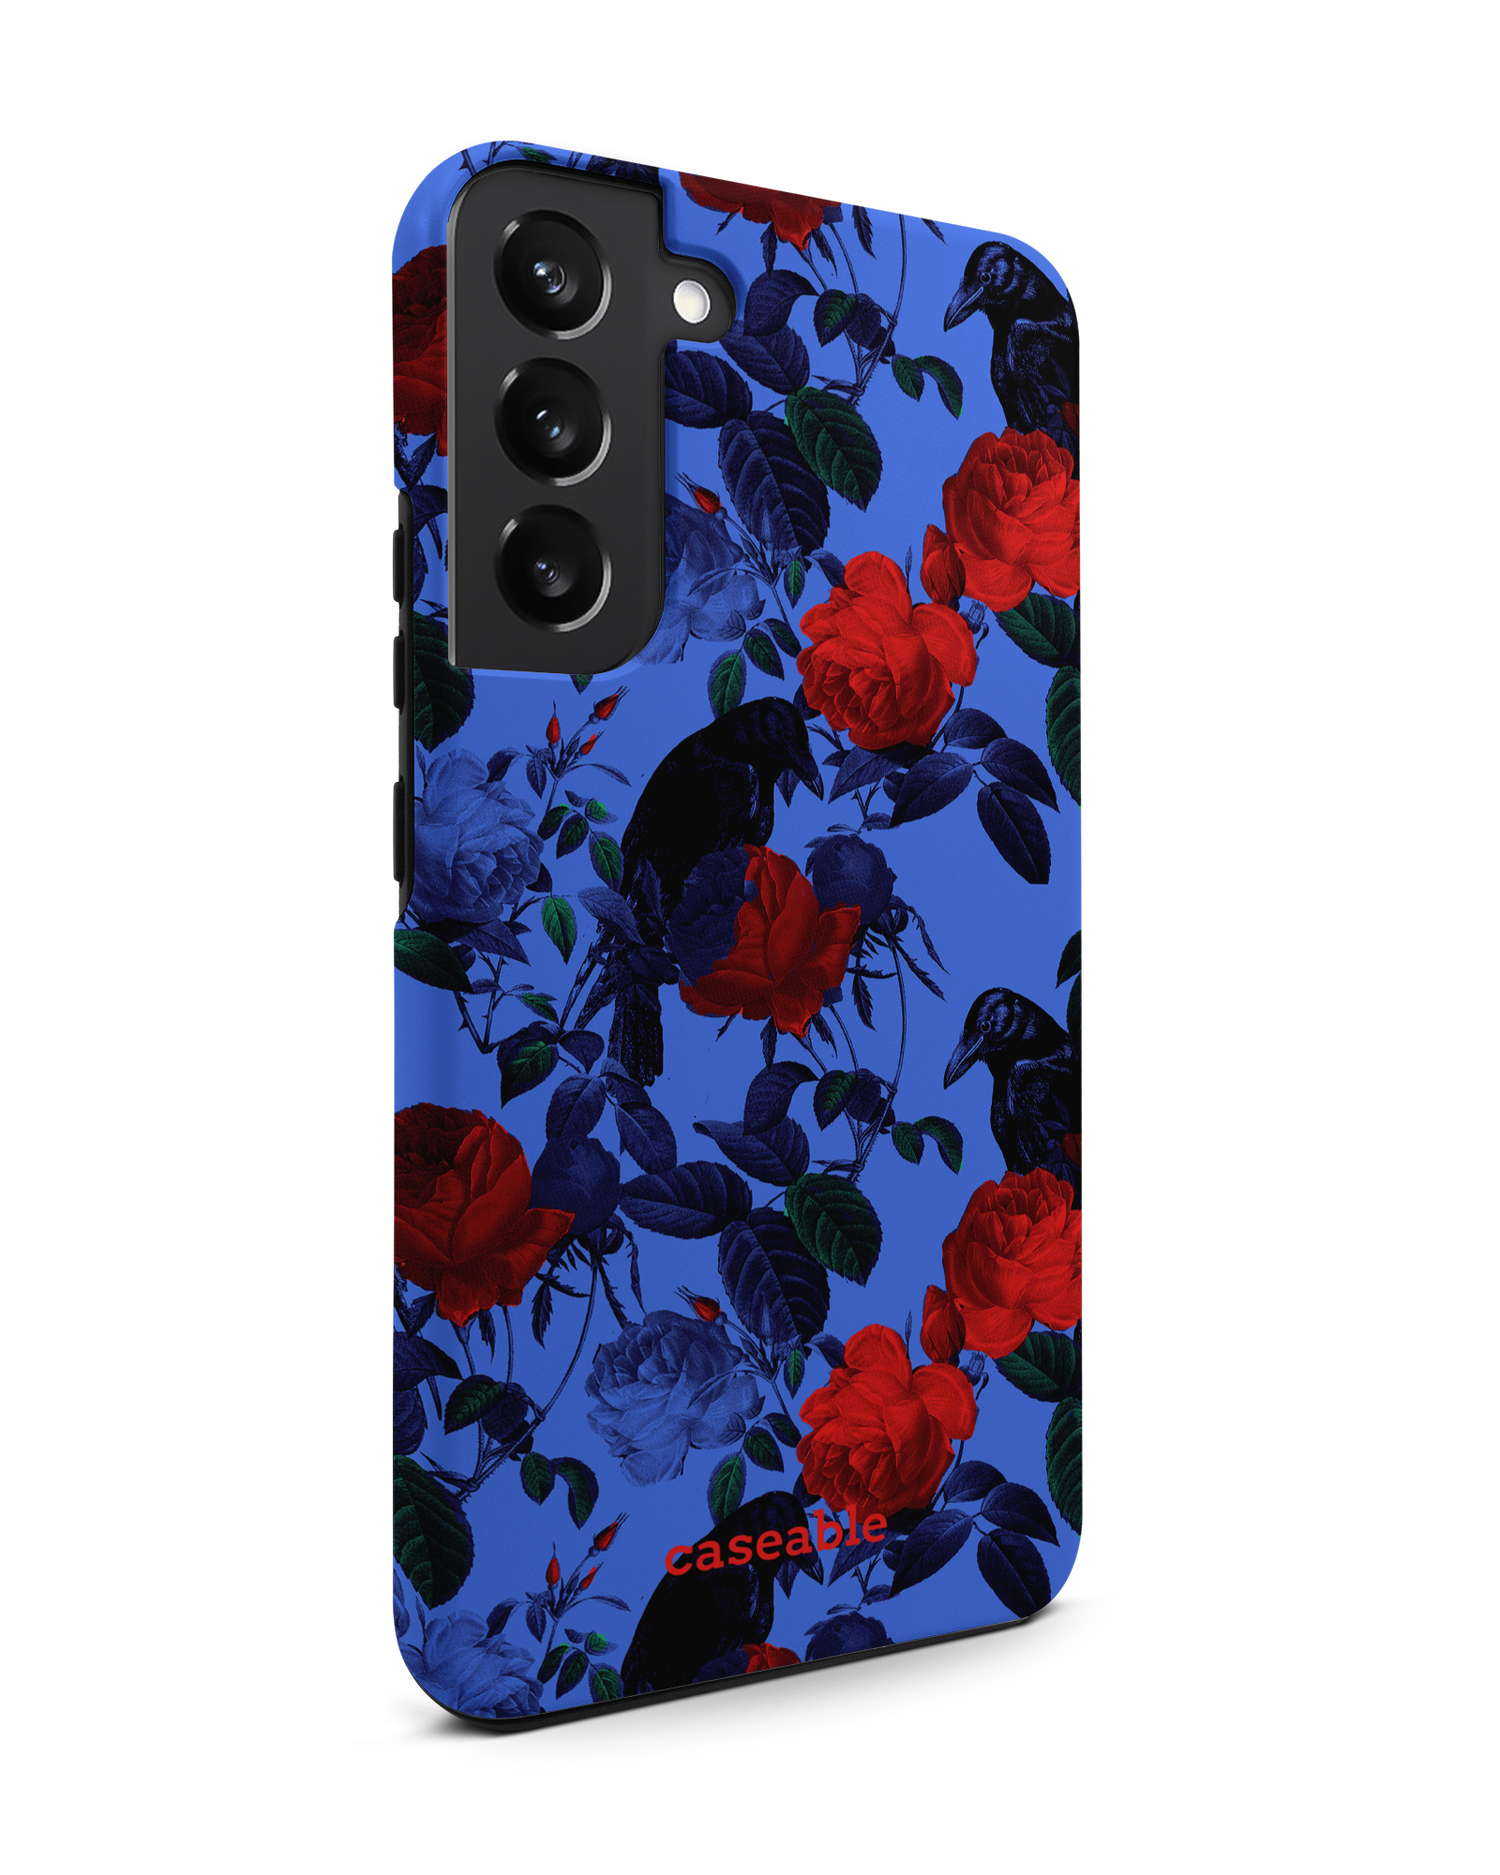 Roses And Ravens Premium Phone Case Samsung Galaxy S22 Plus 5G: View from the left side